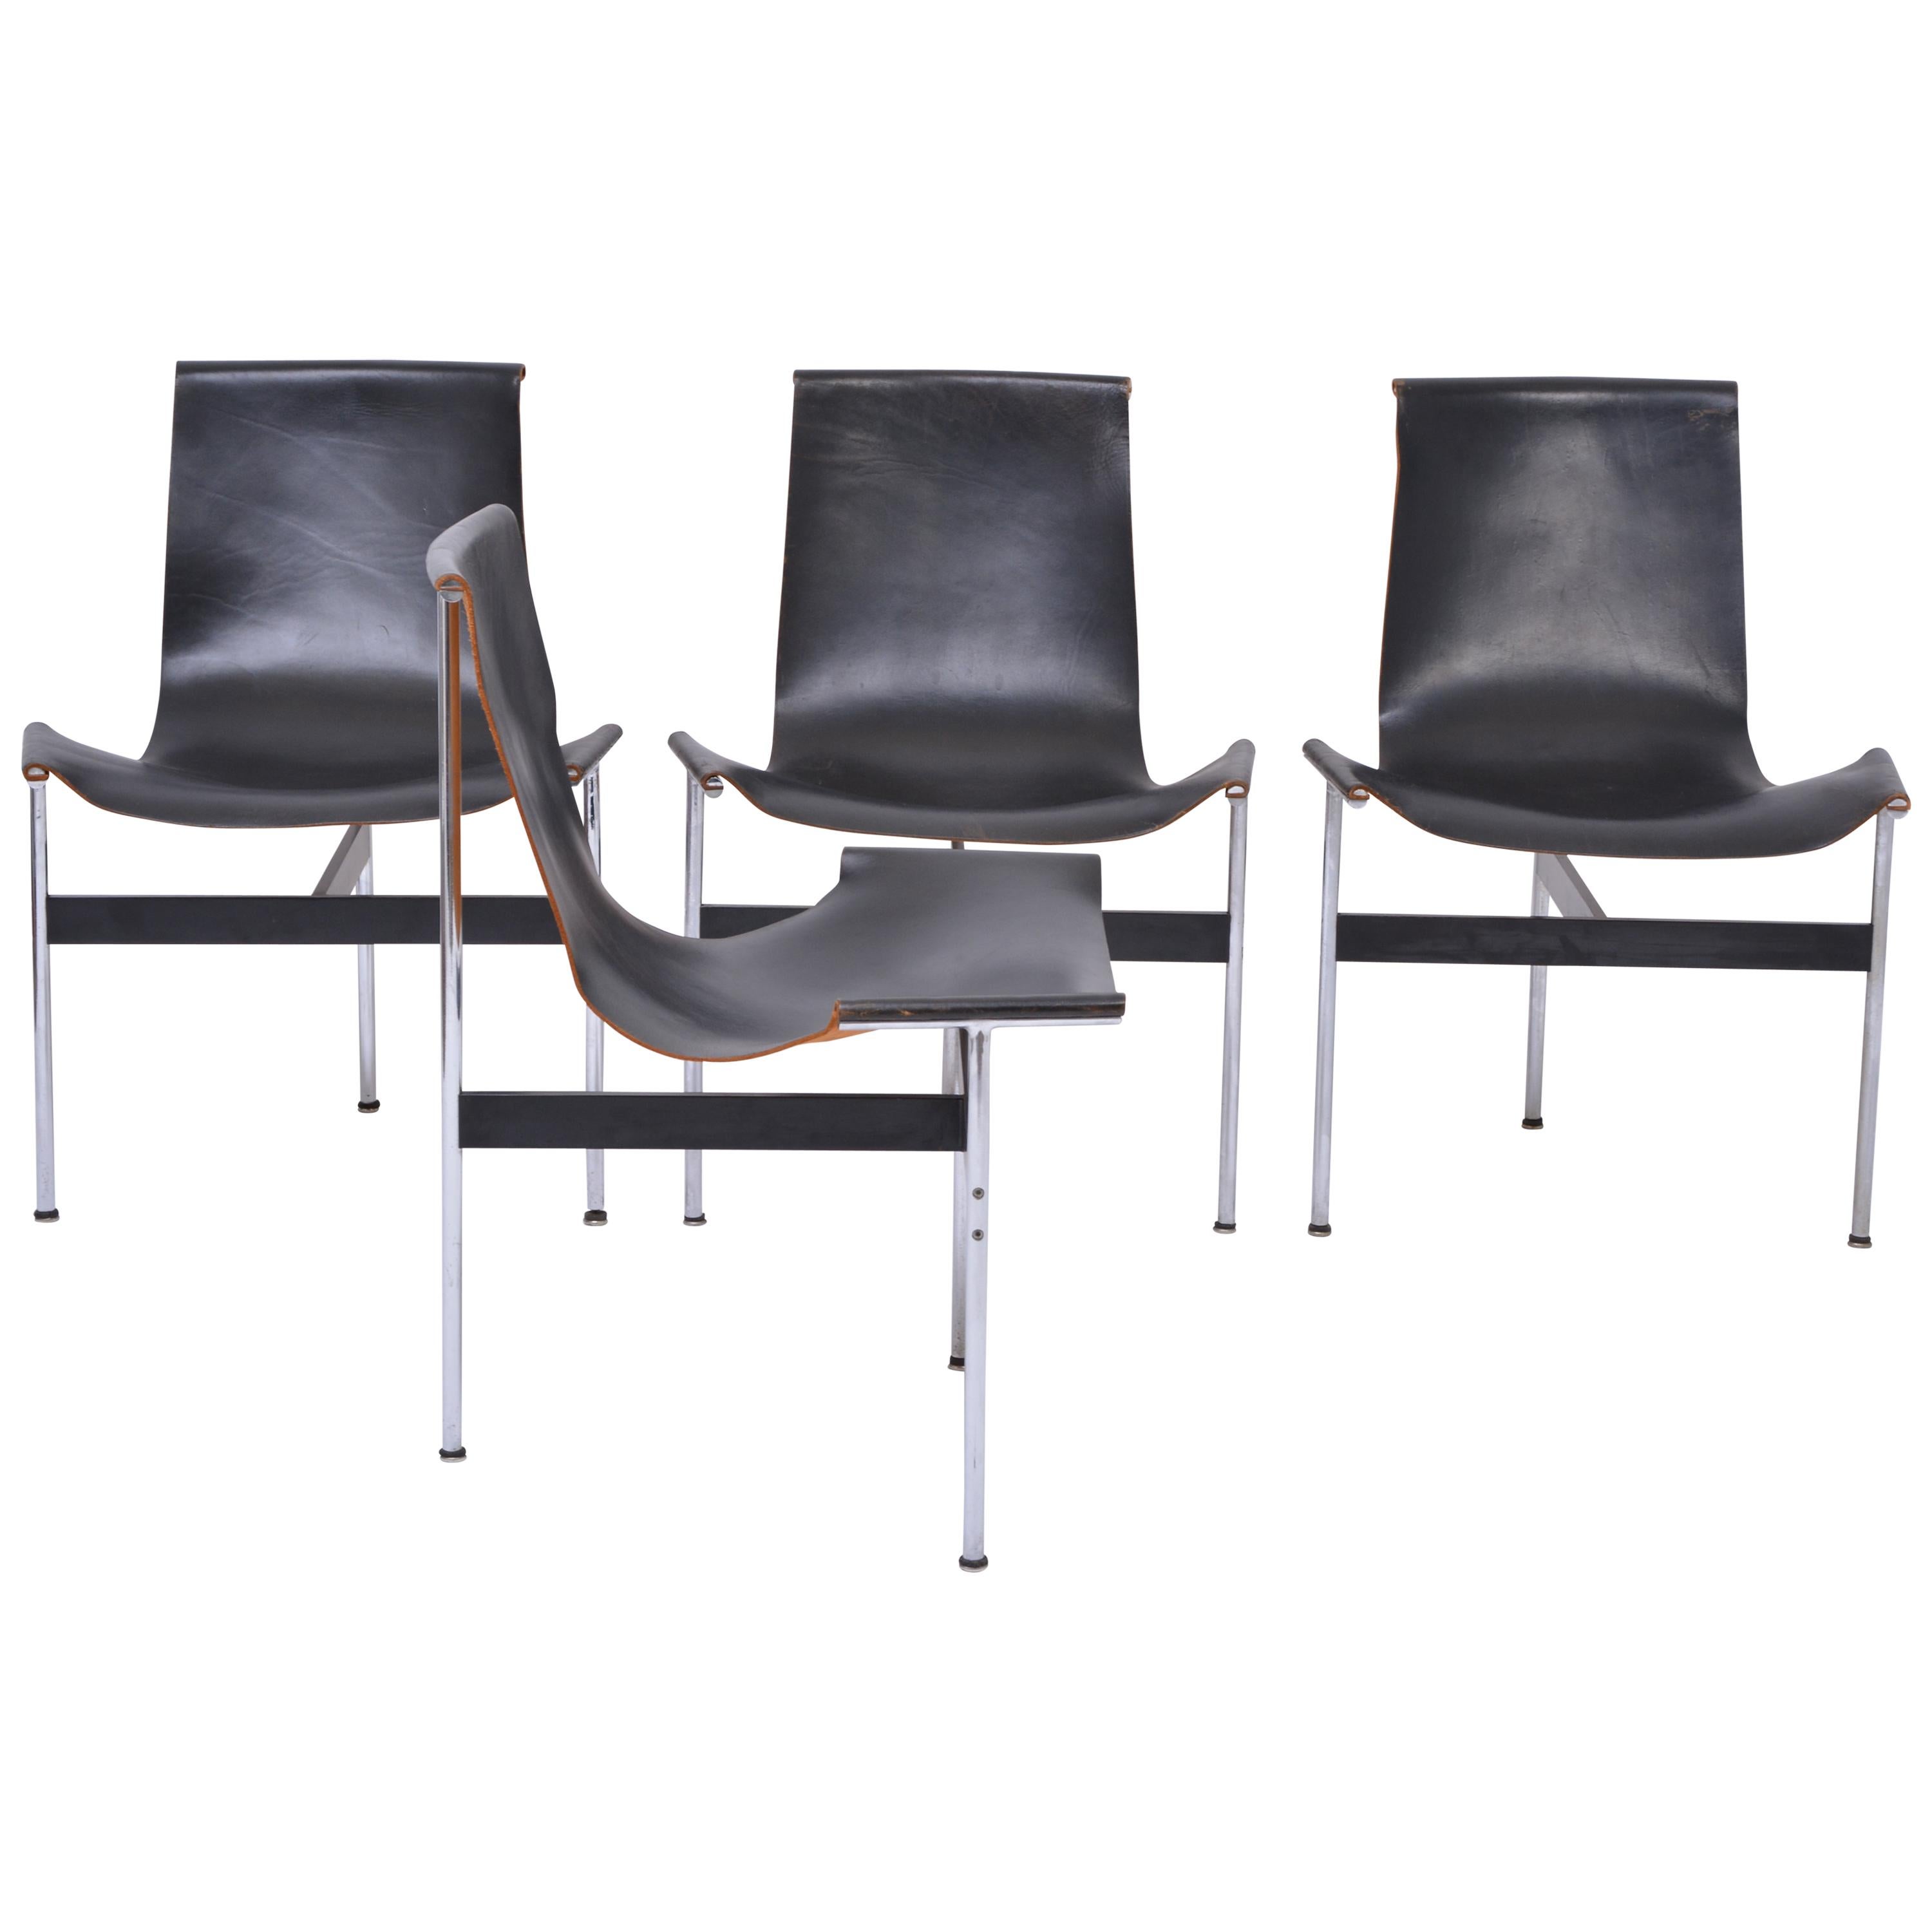 Set of Four Midcentury T-Chairs in black Leather by Katavolos, Littell and Kelly